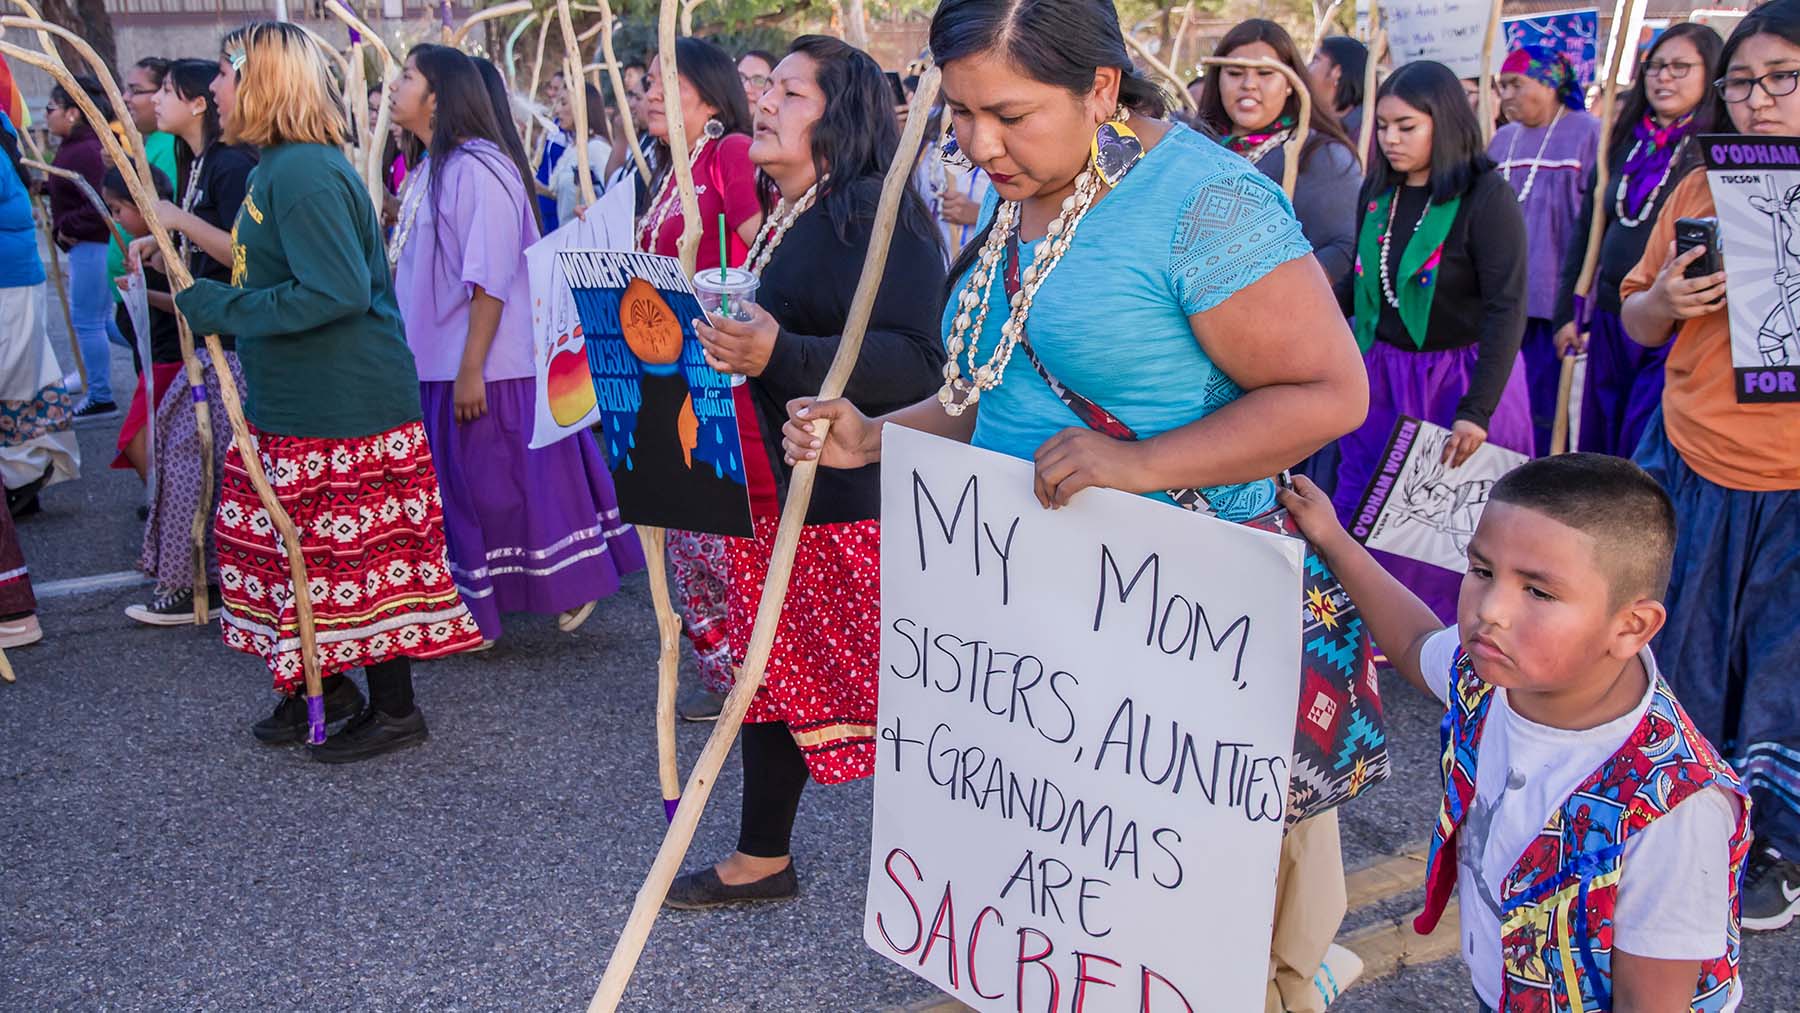 Tohono Indian Women led the Tucson 2019 Women’s March with a show of strength, resilience and power.